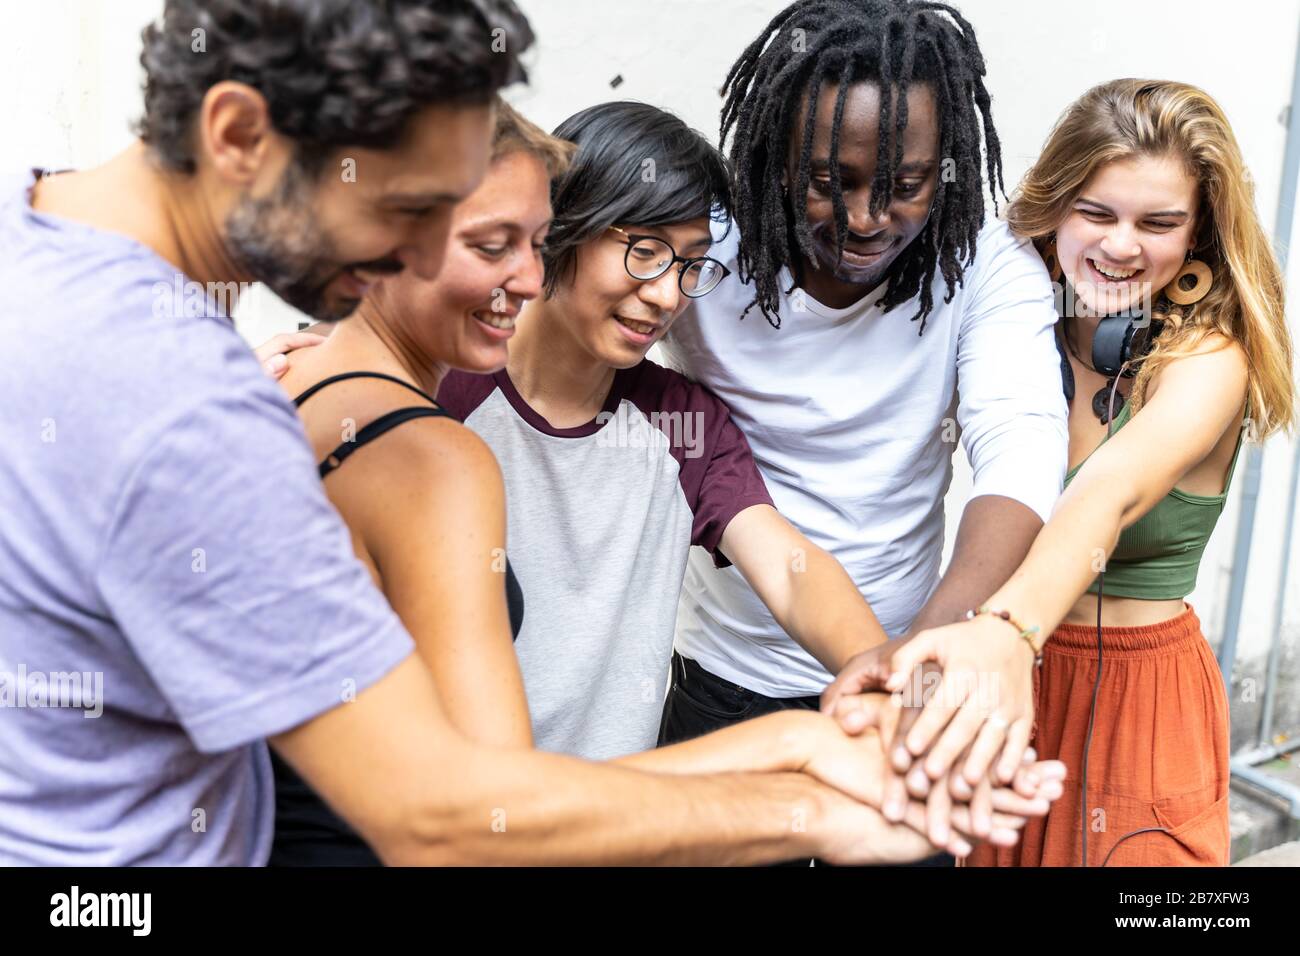 group of people from different ethnic groups putting their hand together in a team gesture Stock Photo